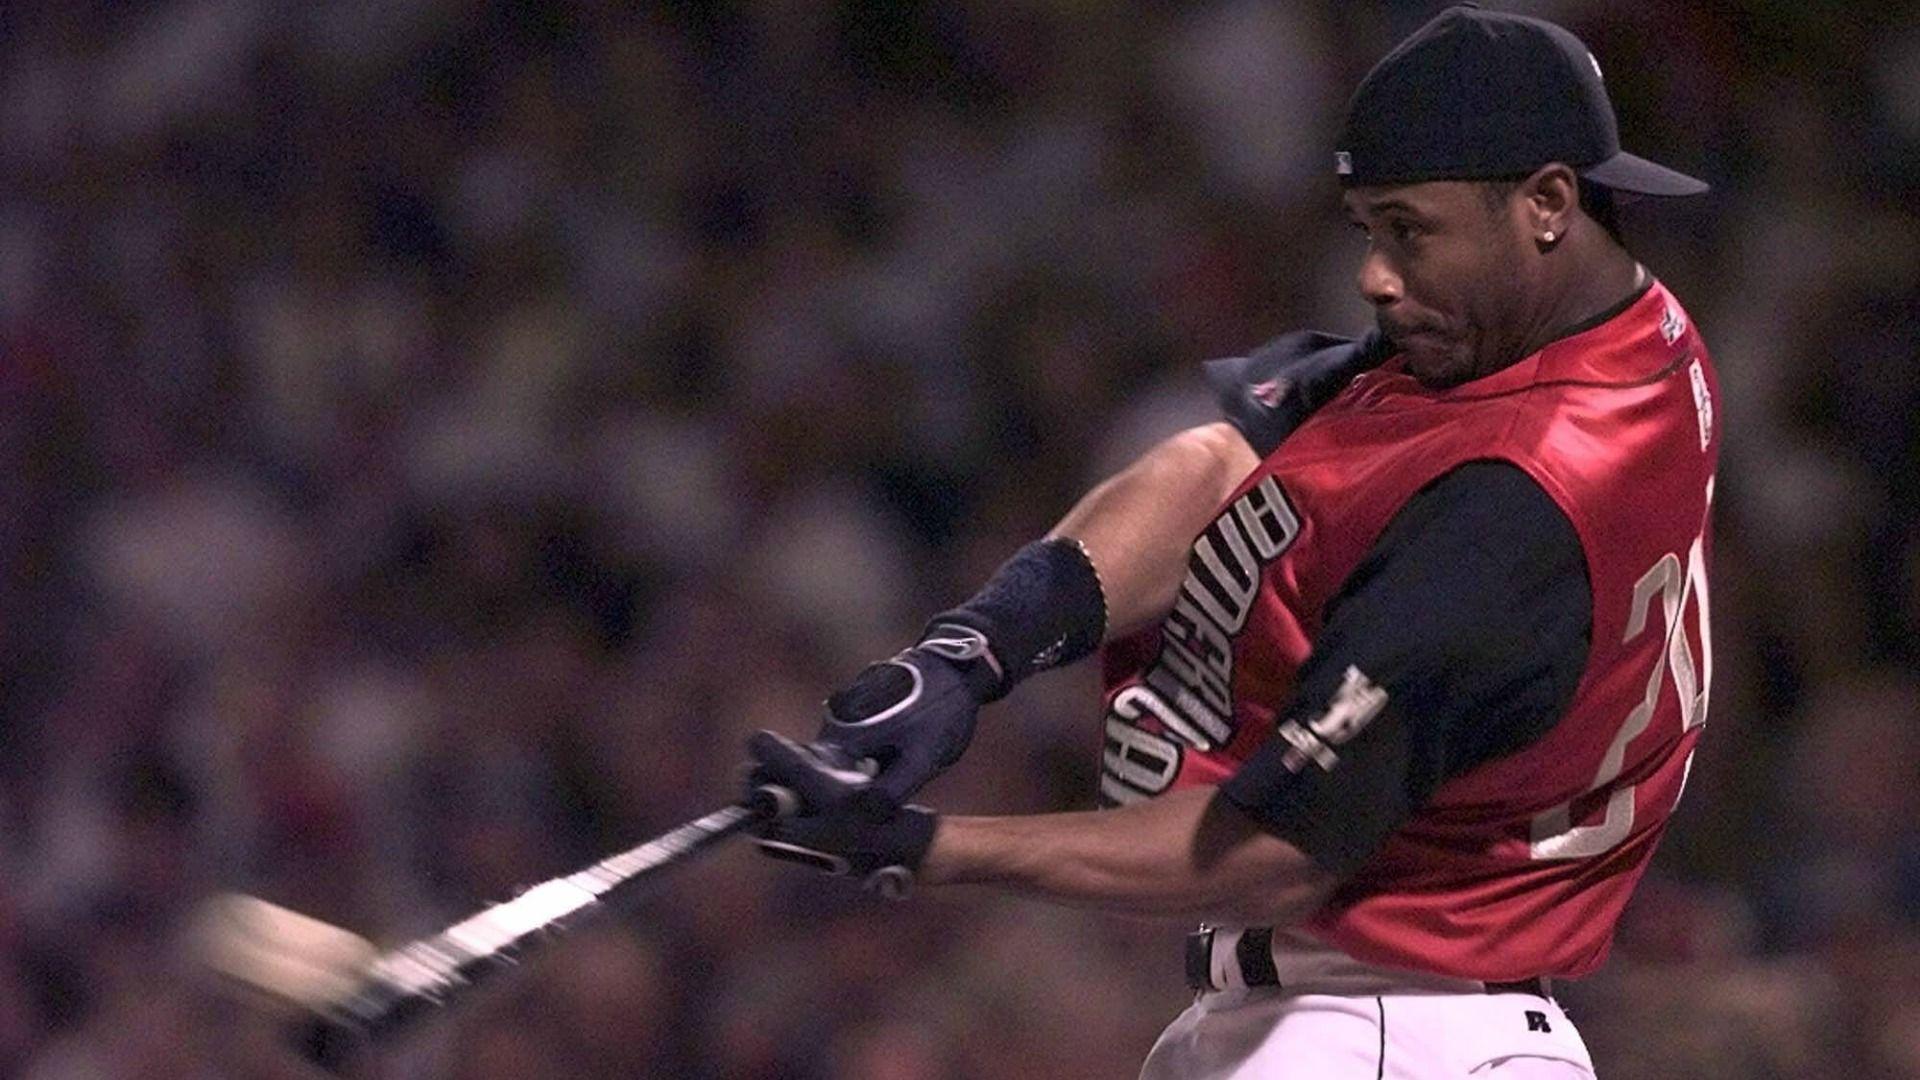 Ken Griffey Jr. explains why he wore his hat backwards.